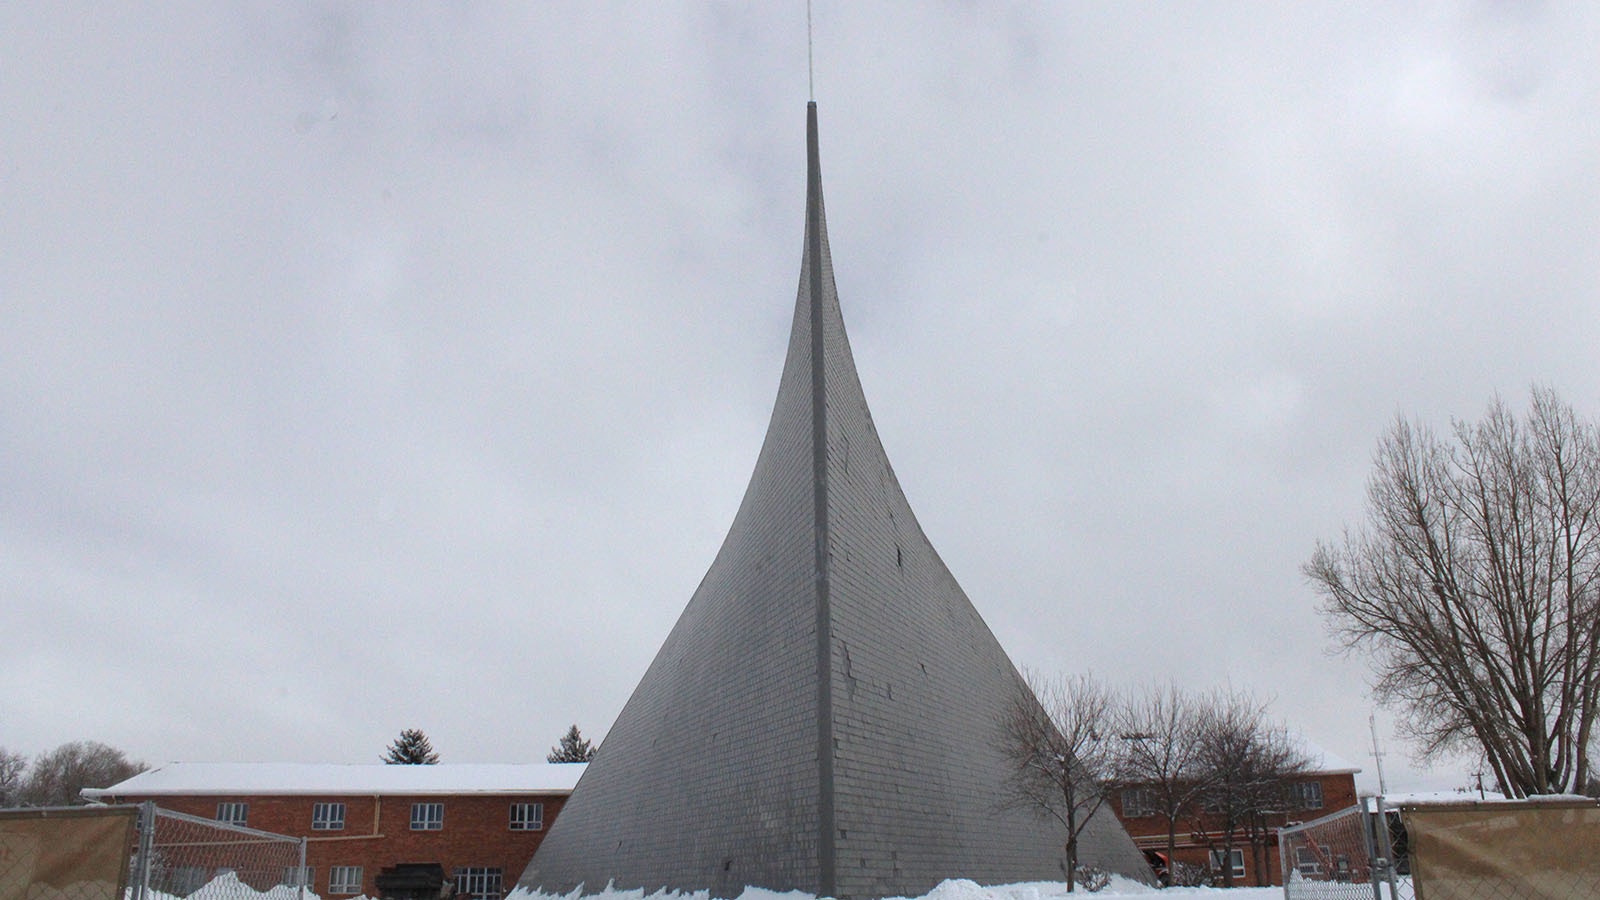 Laramie's iconic "Boat Church" earned its nickname because it looks like the hull of a ship from the right angle.